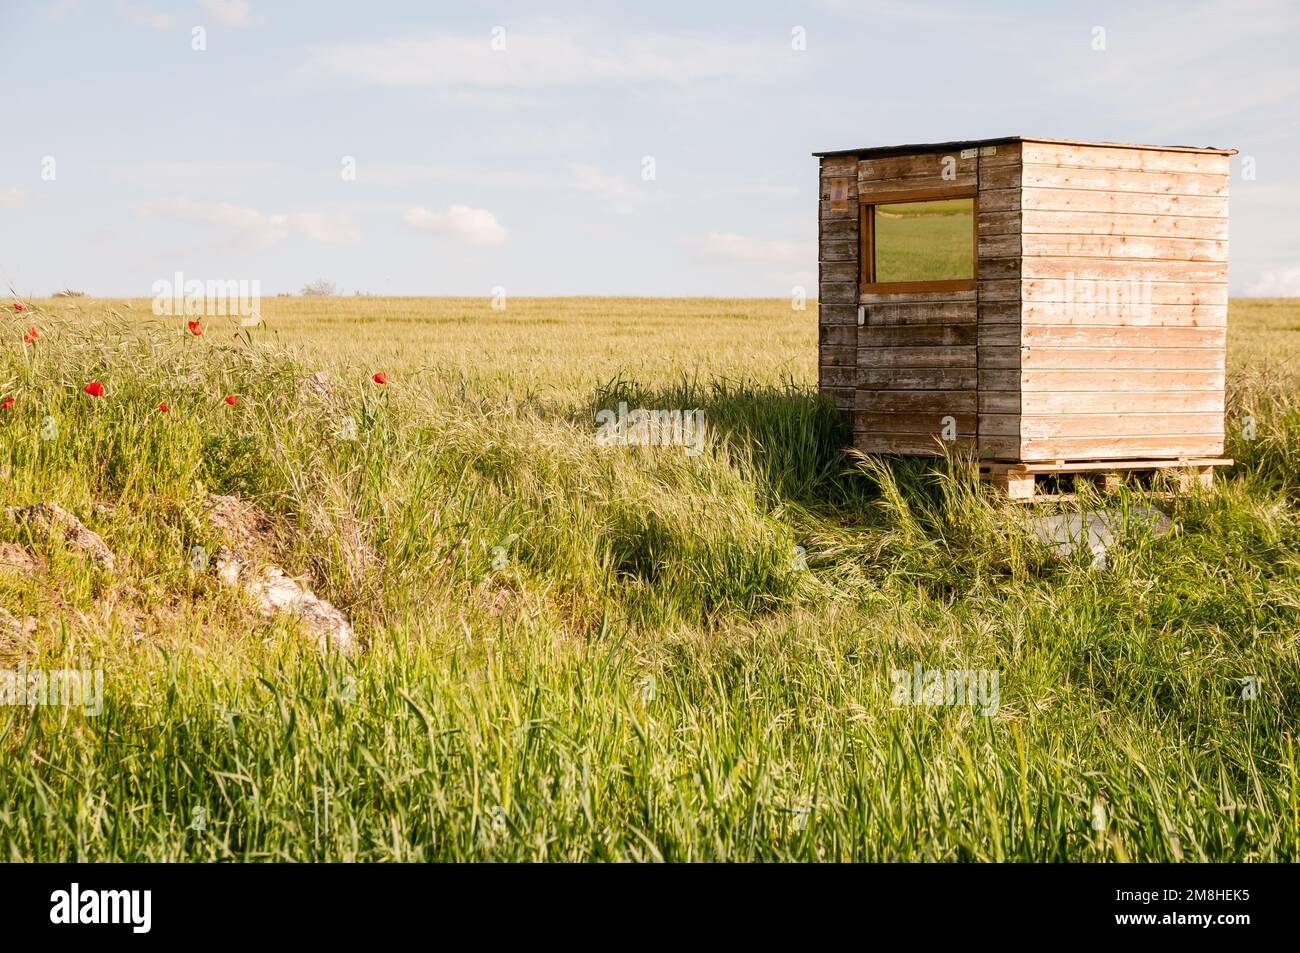 Birding hide in the middle of crop field, Montgai, Lleida, Catalonia, Spain Stock Photo